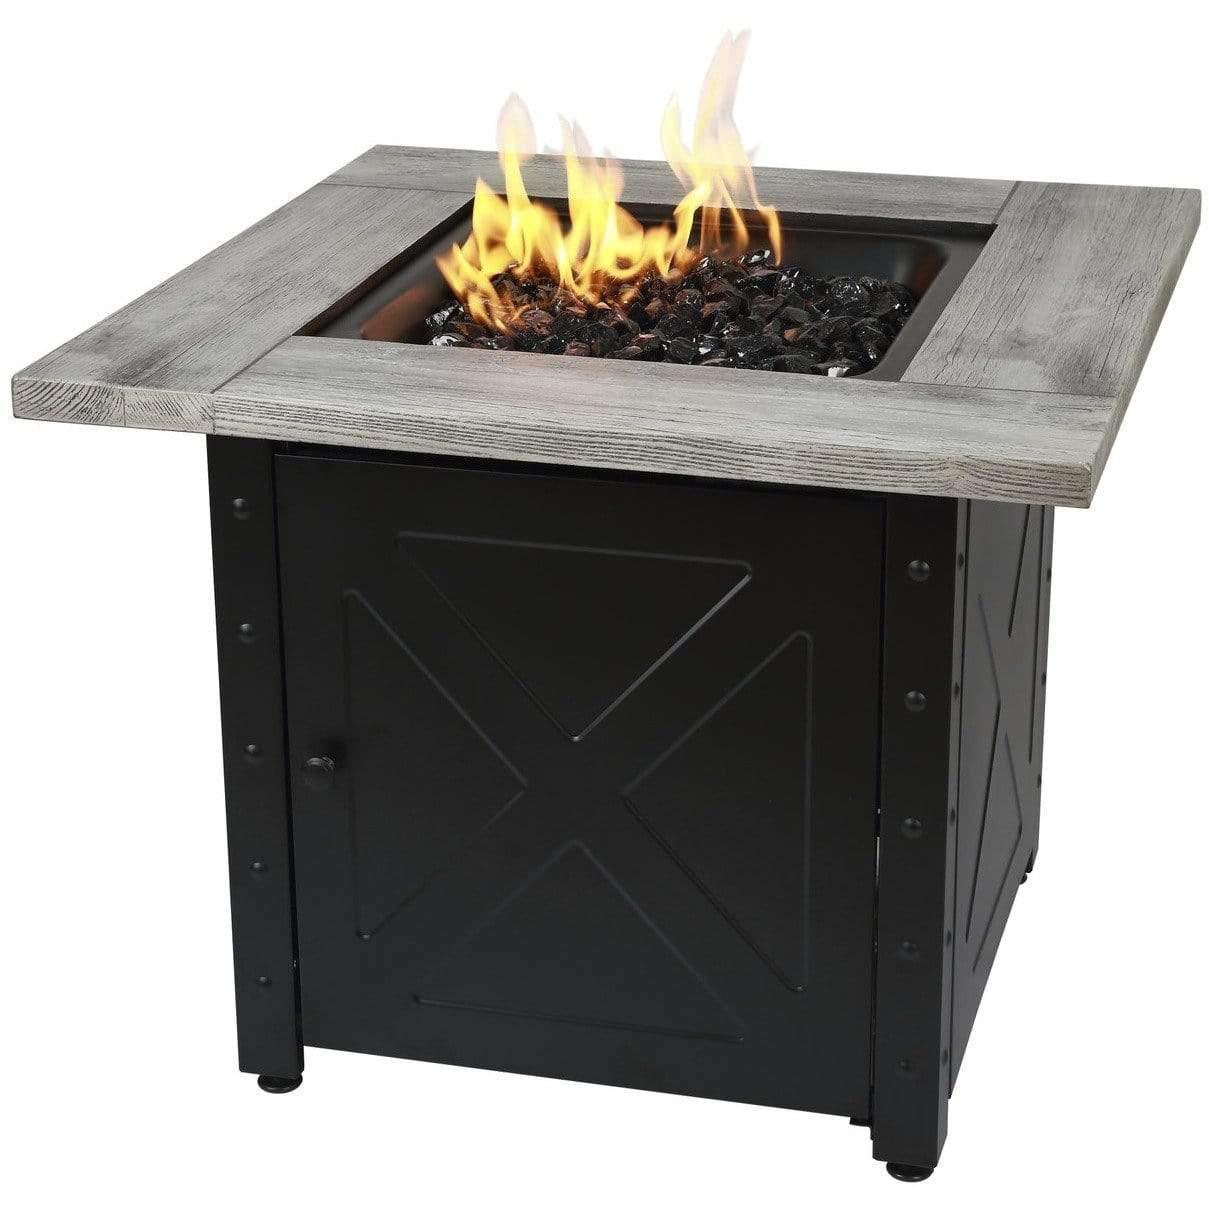 Endless Summer The Mason, 30" Square Gas Outdoor Fire Pit with Printed Wood Lat look Cement Resin Mantel - GAD15300ES - Fire Pit Stock